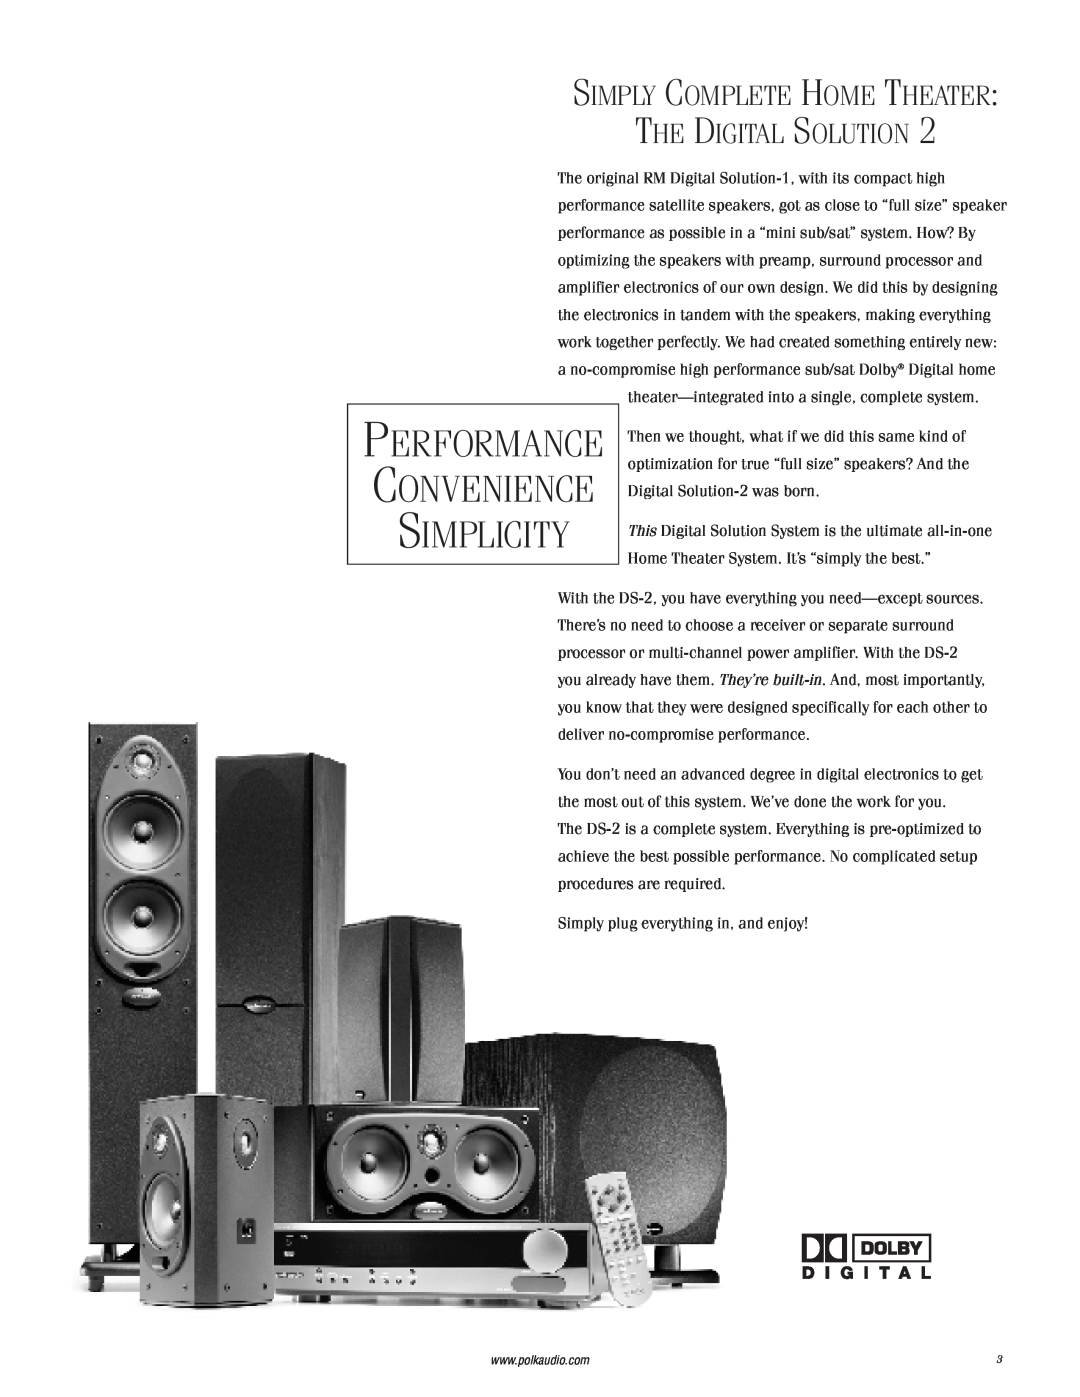 Polk Audio 2 instruction manual Simply Complete Home Theater The Digital Solution, Simplicity, Performance Convenience 